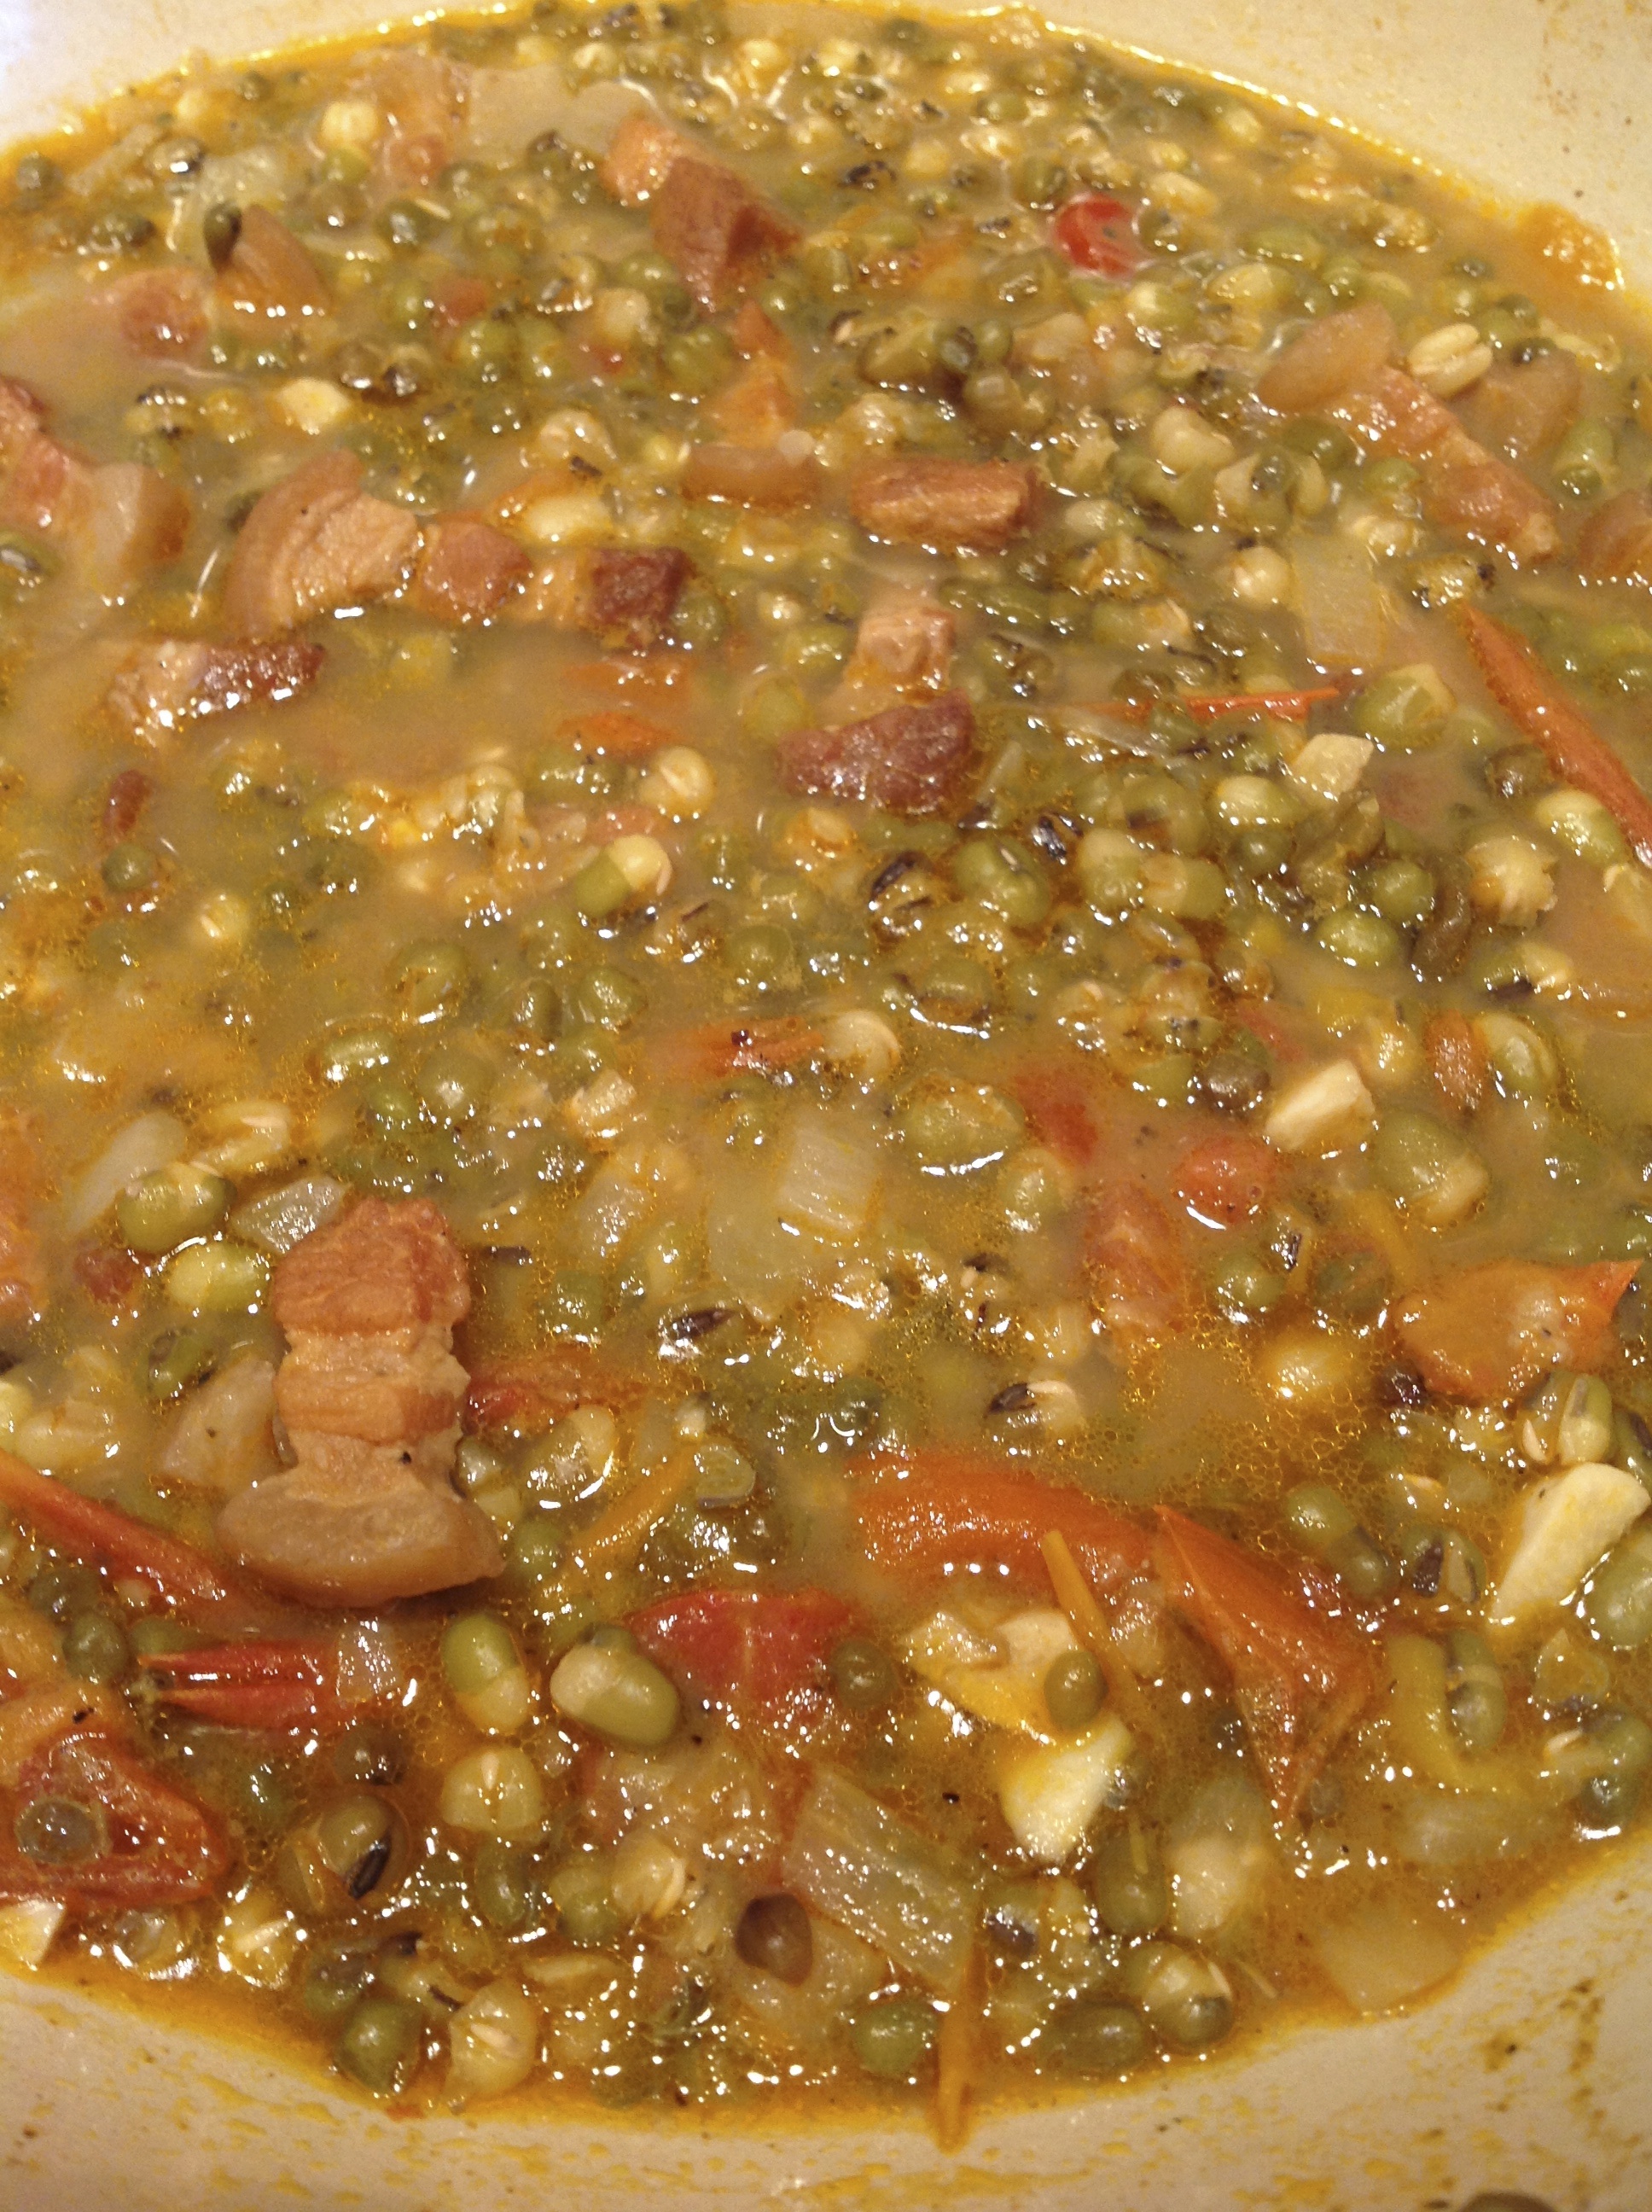 mung bean soup (with pork belly)